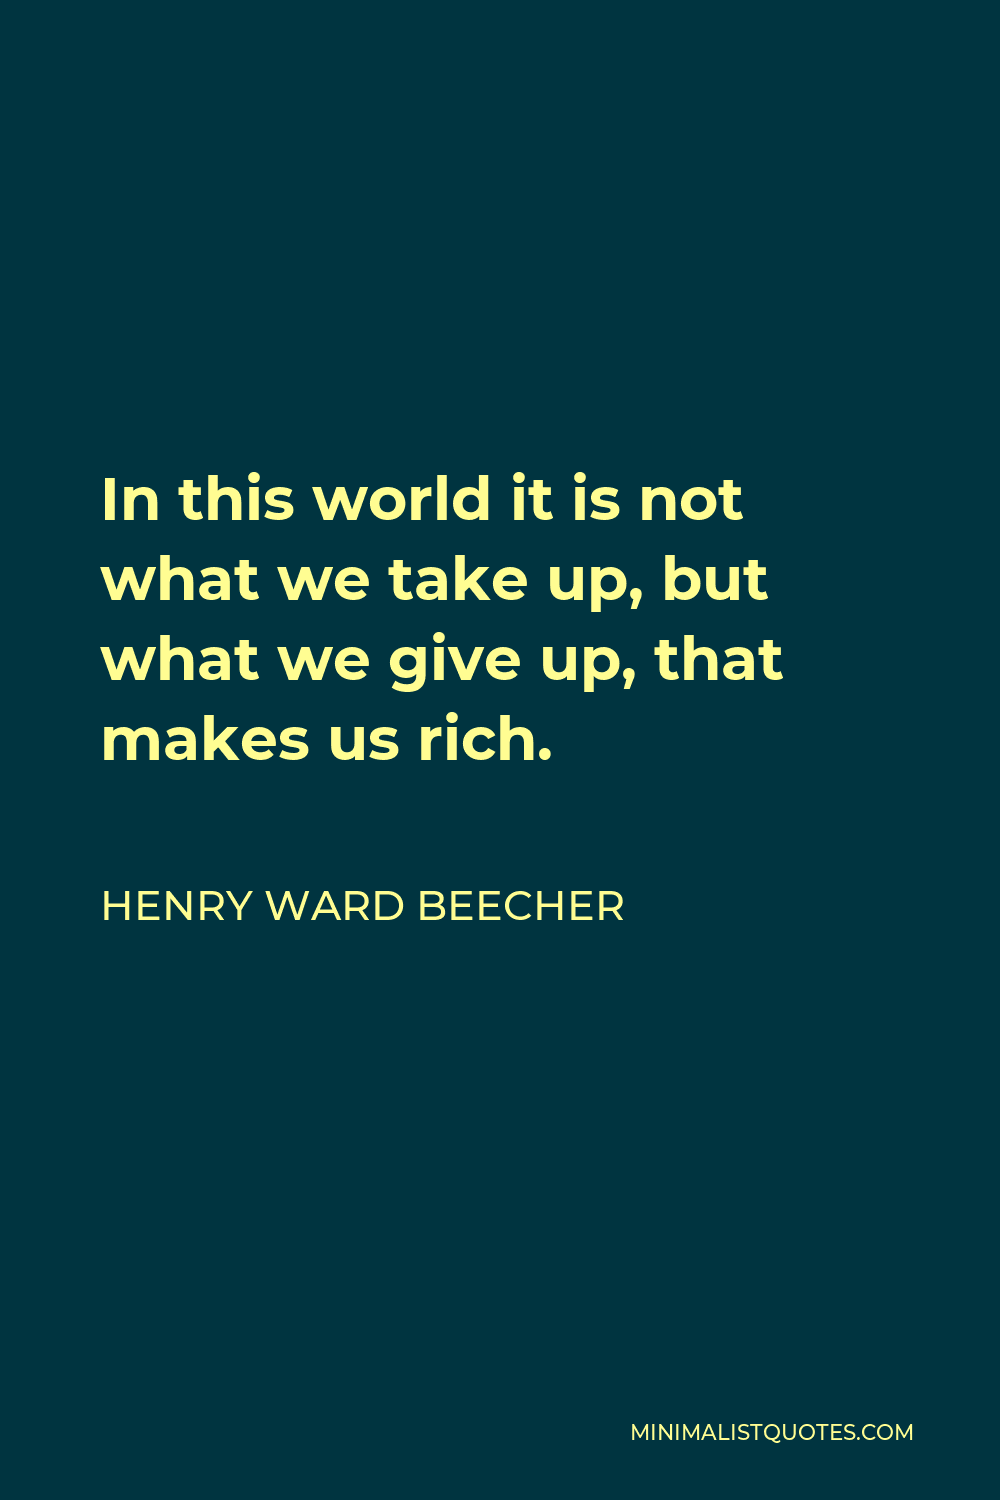 Henry Ward Beecher Quote - In this world it is not what we take up, but what we give up, that makes us rich.